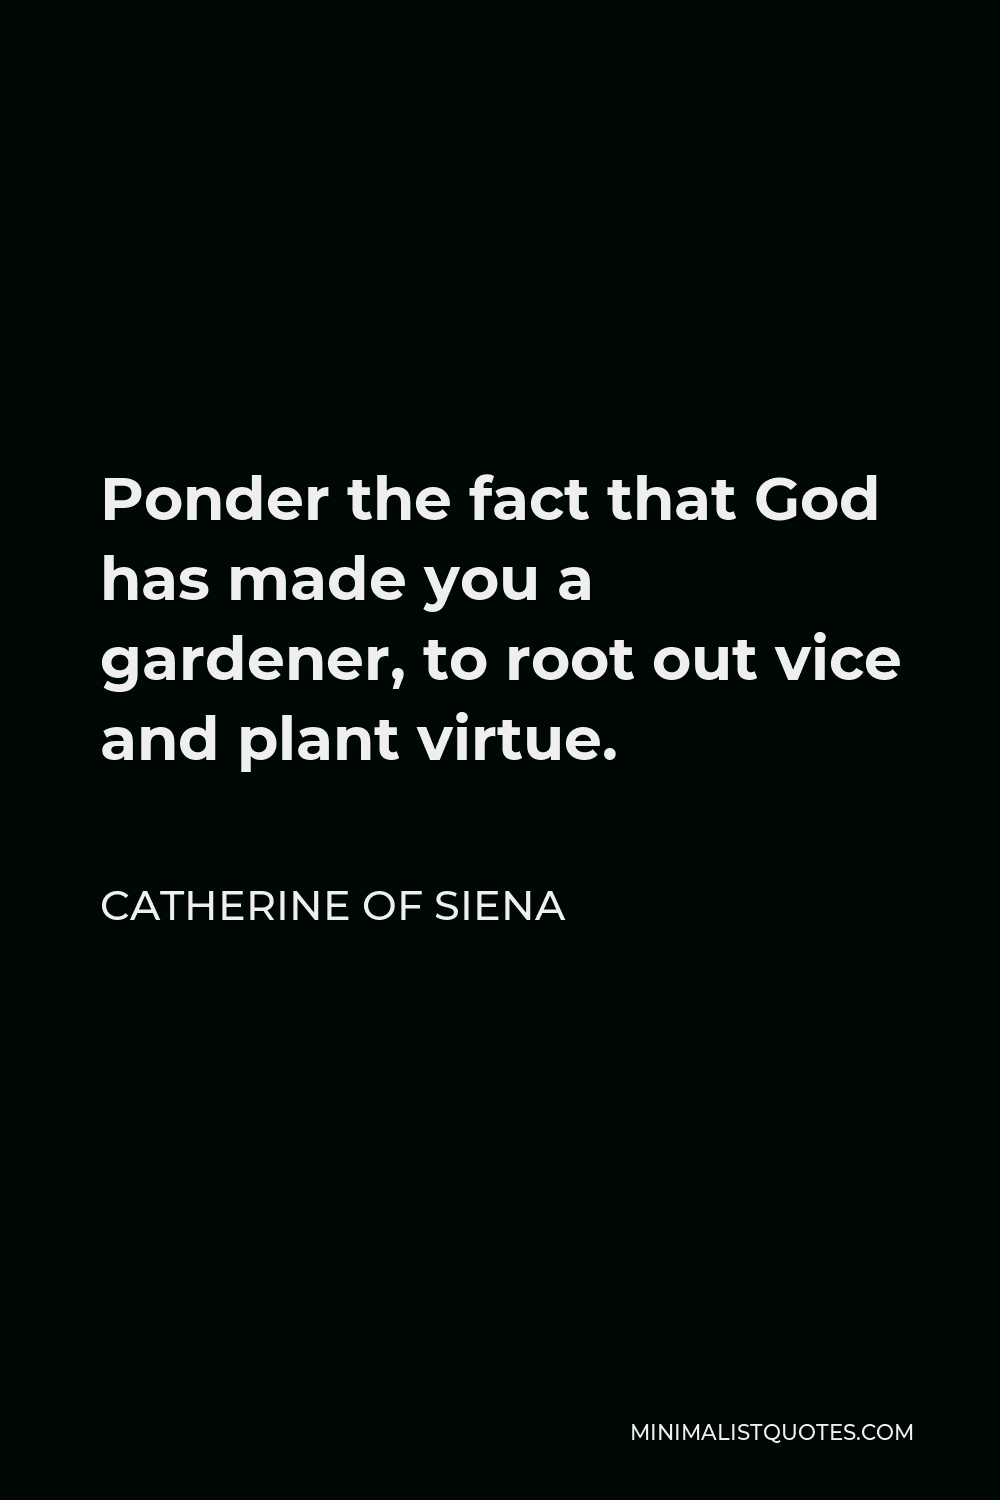 Catherine of Siena Quote - Ponder the fact that God has made you a gardener, to root out vice and plant virtue.